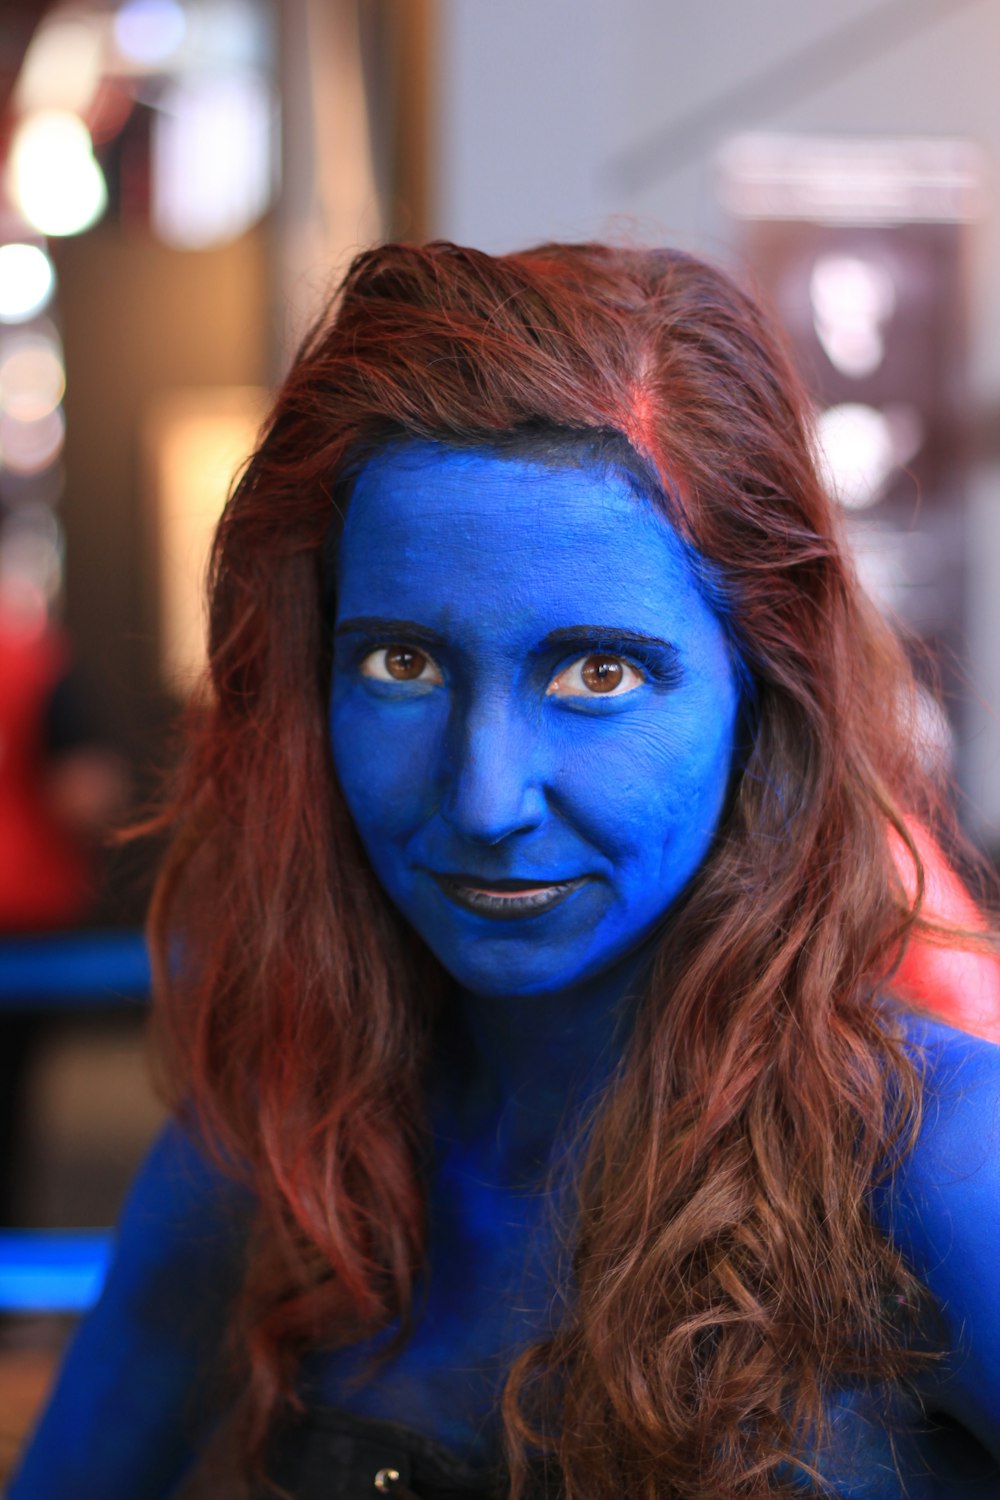 woman with blue bodypaint in selective focus photography